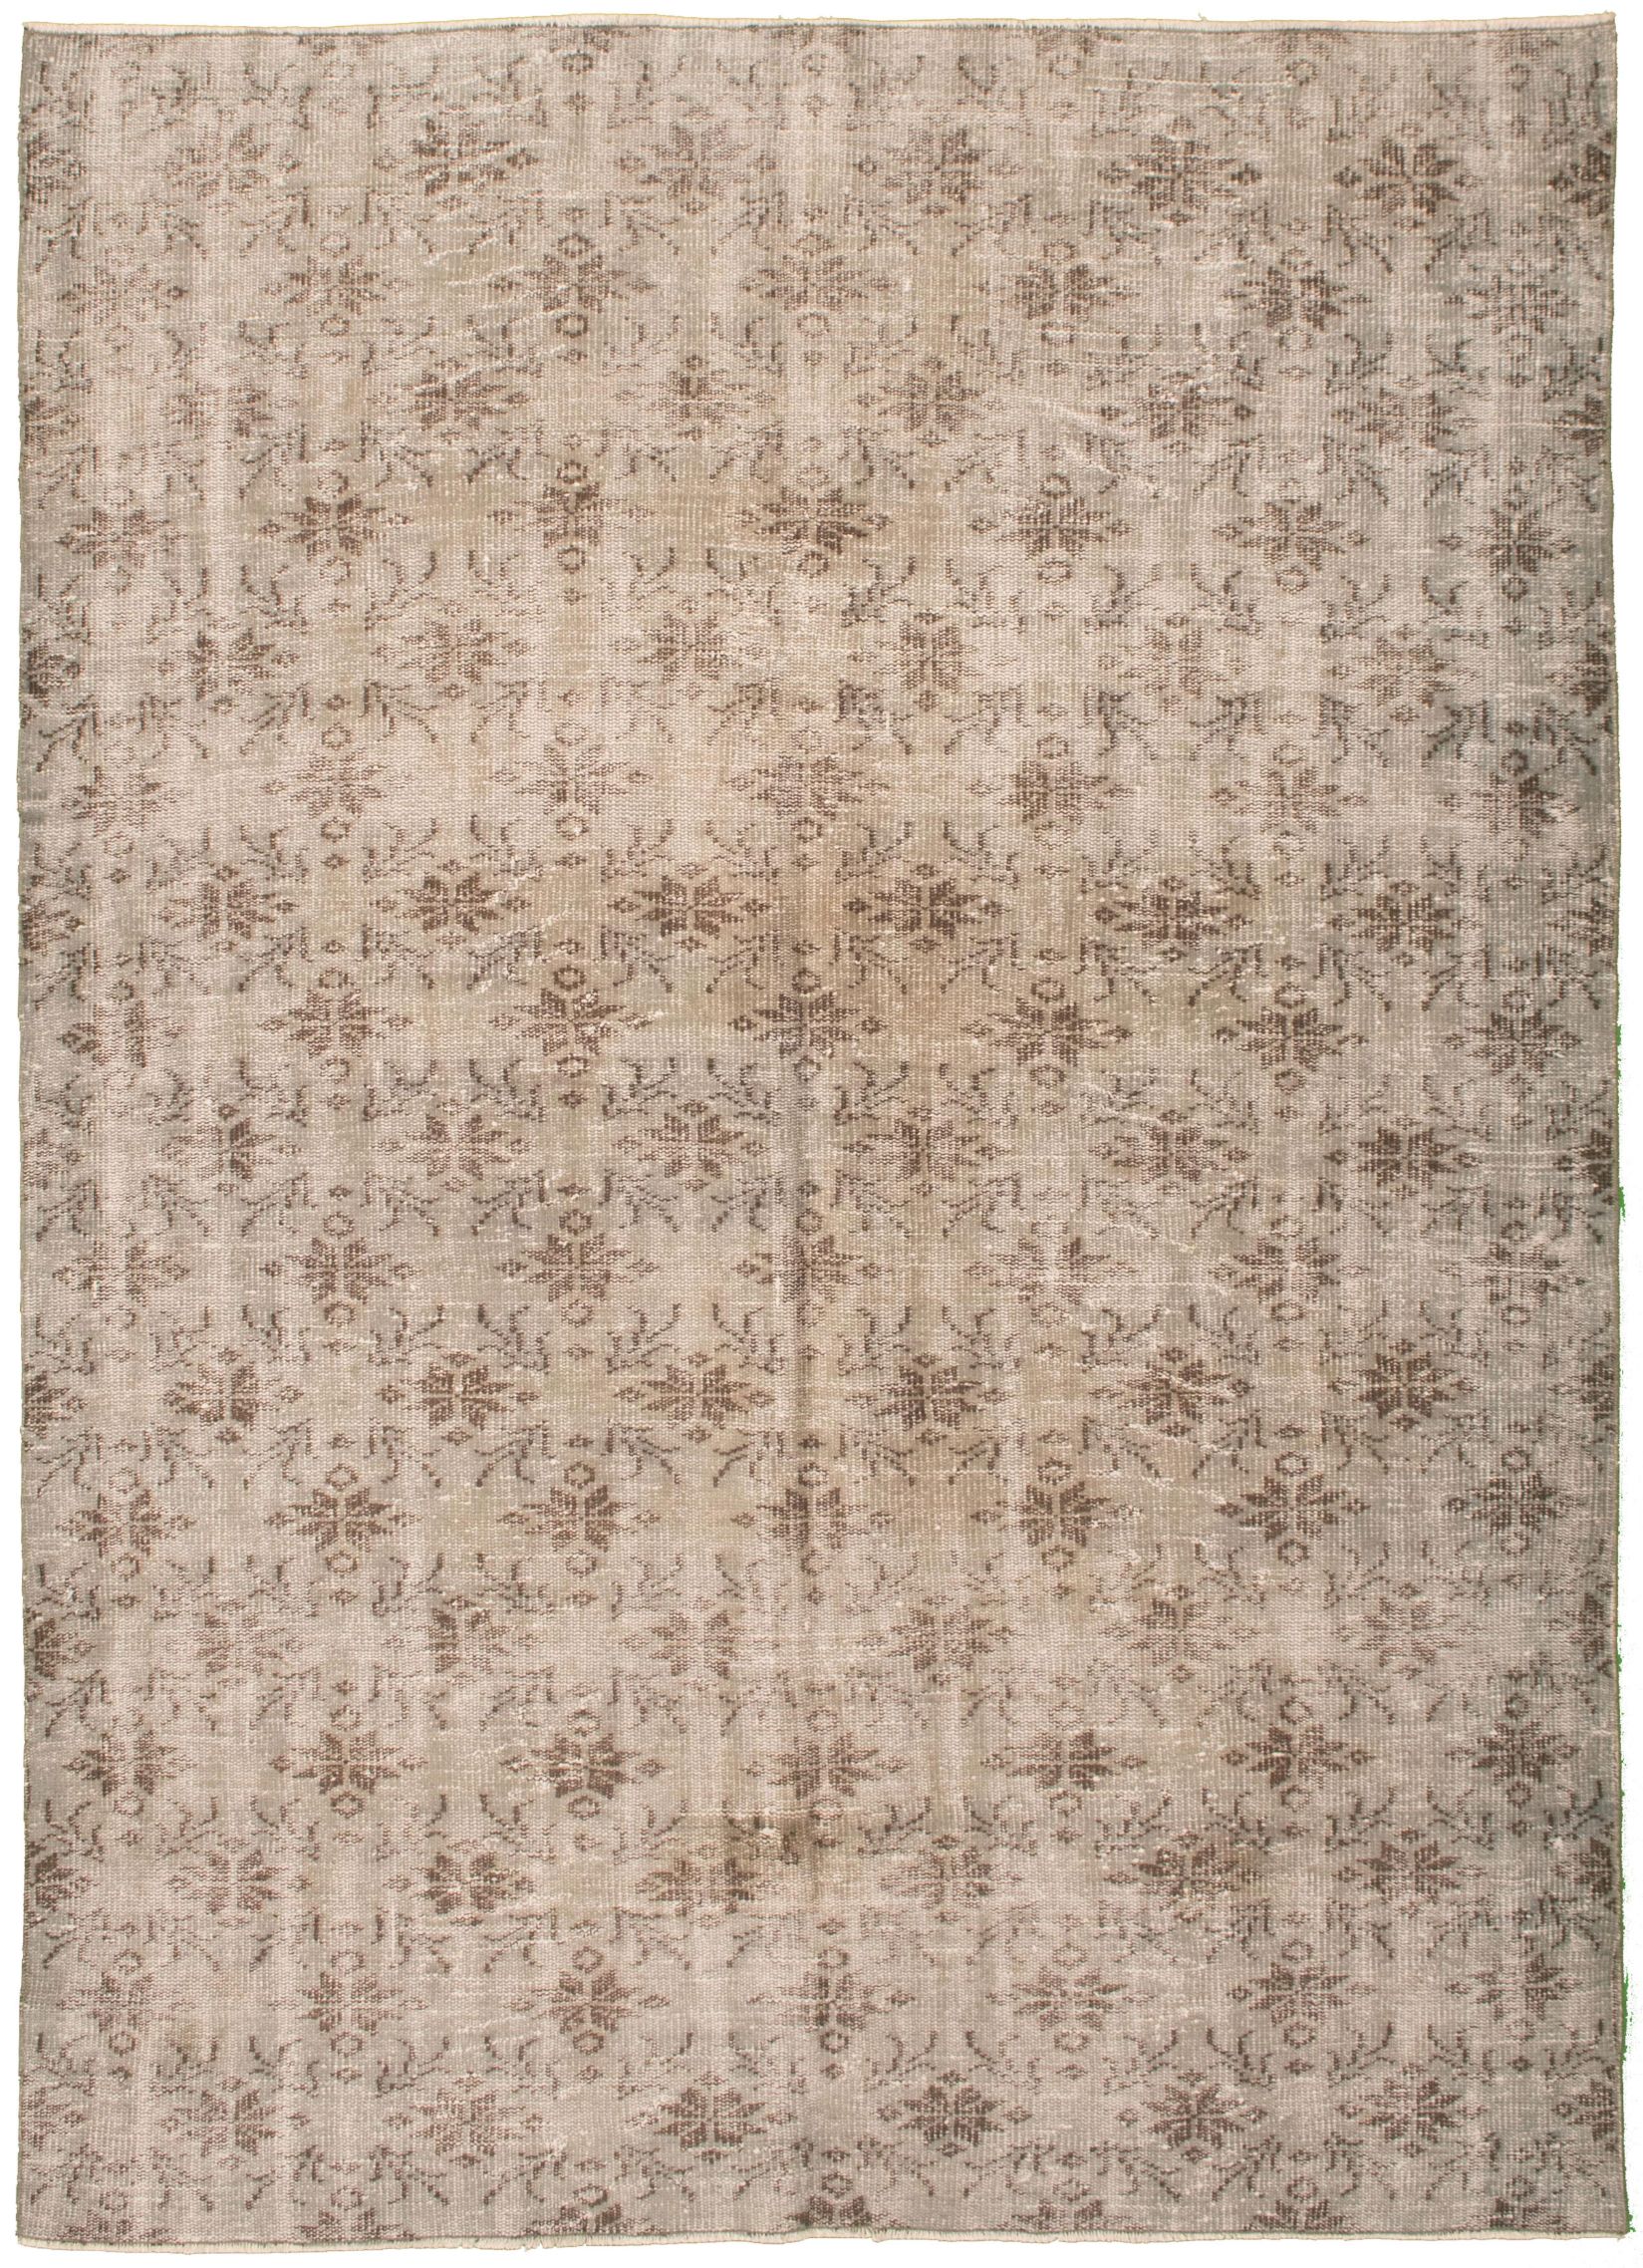 Hand-knotted Color Transition Light Grey Wool Rug 9'1" x 6'4" Size: 9'1" x 6'4"  